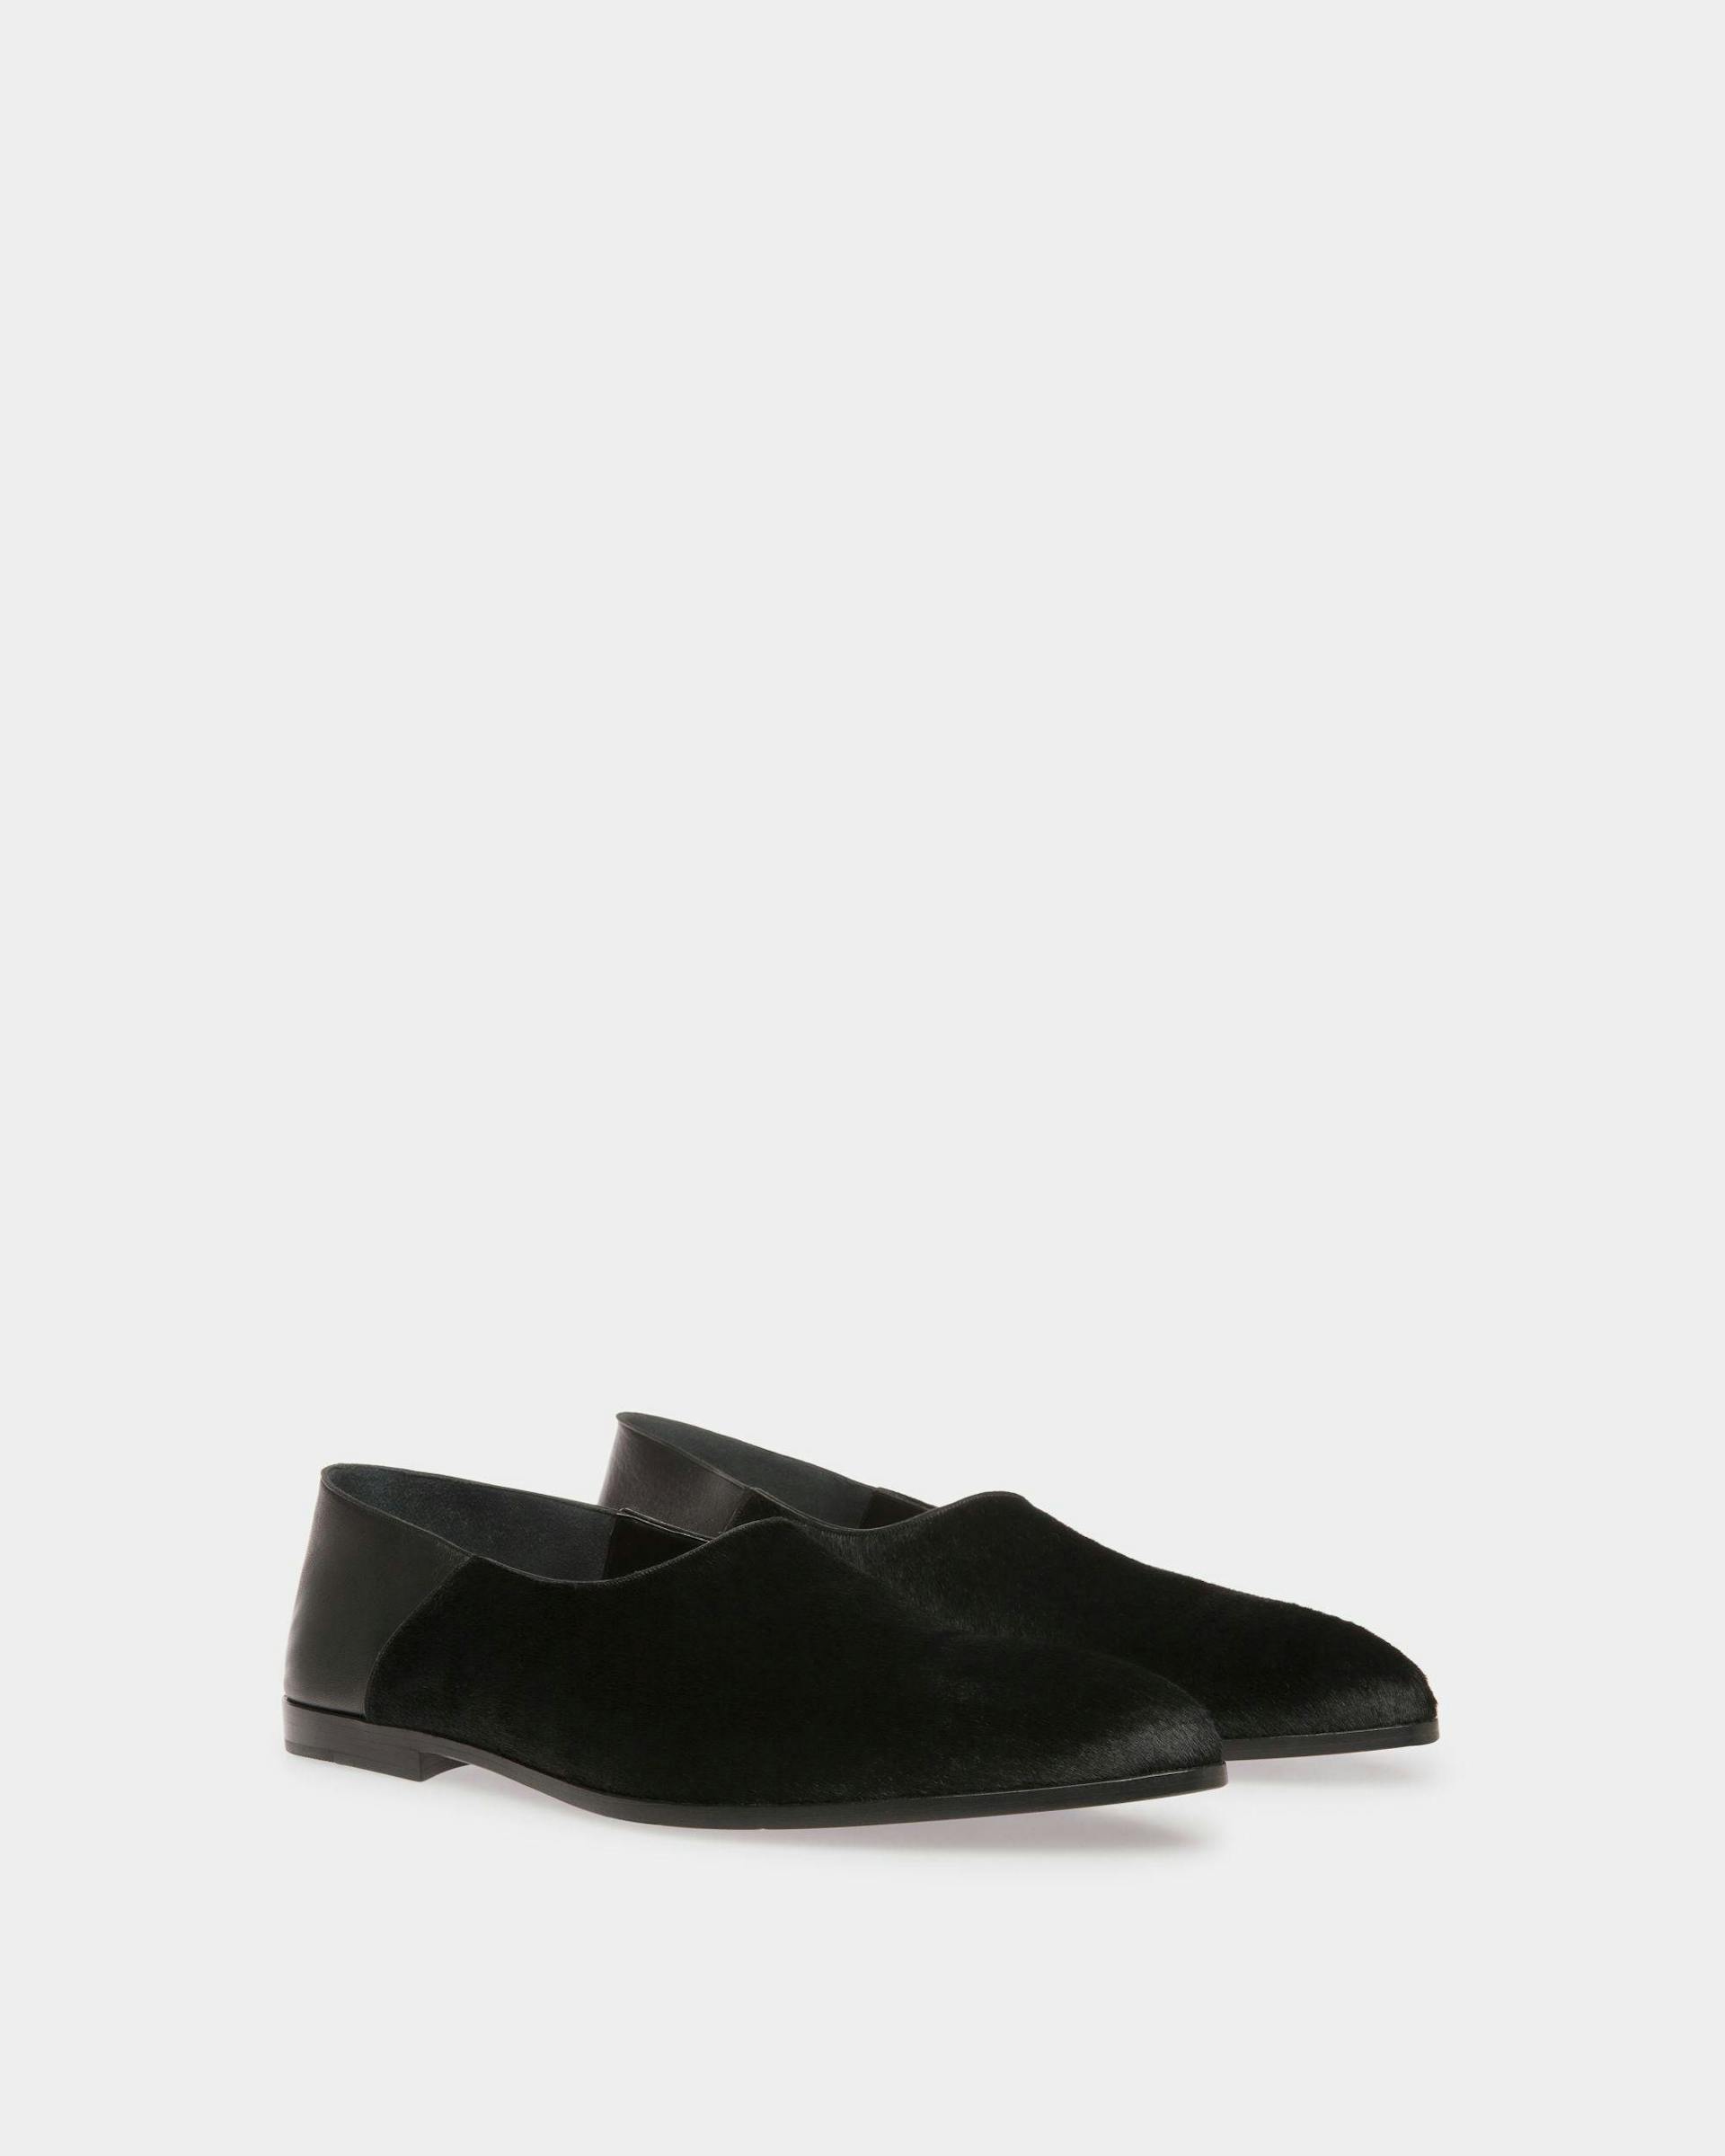 Men's Vegas Flat Loafers In Black Haircalf Leather | Bally | Still Life 3/4 Front